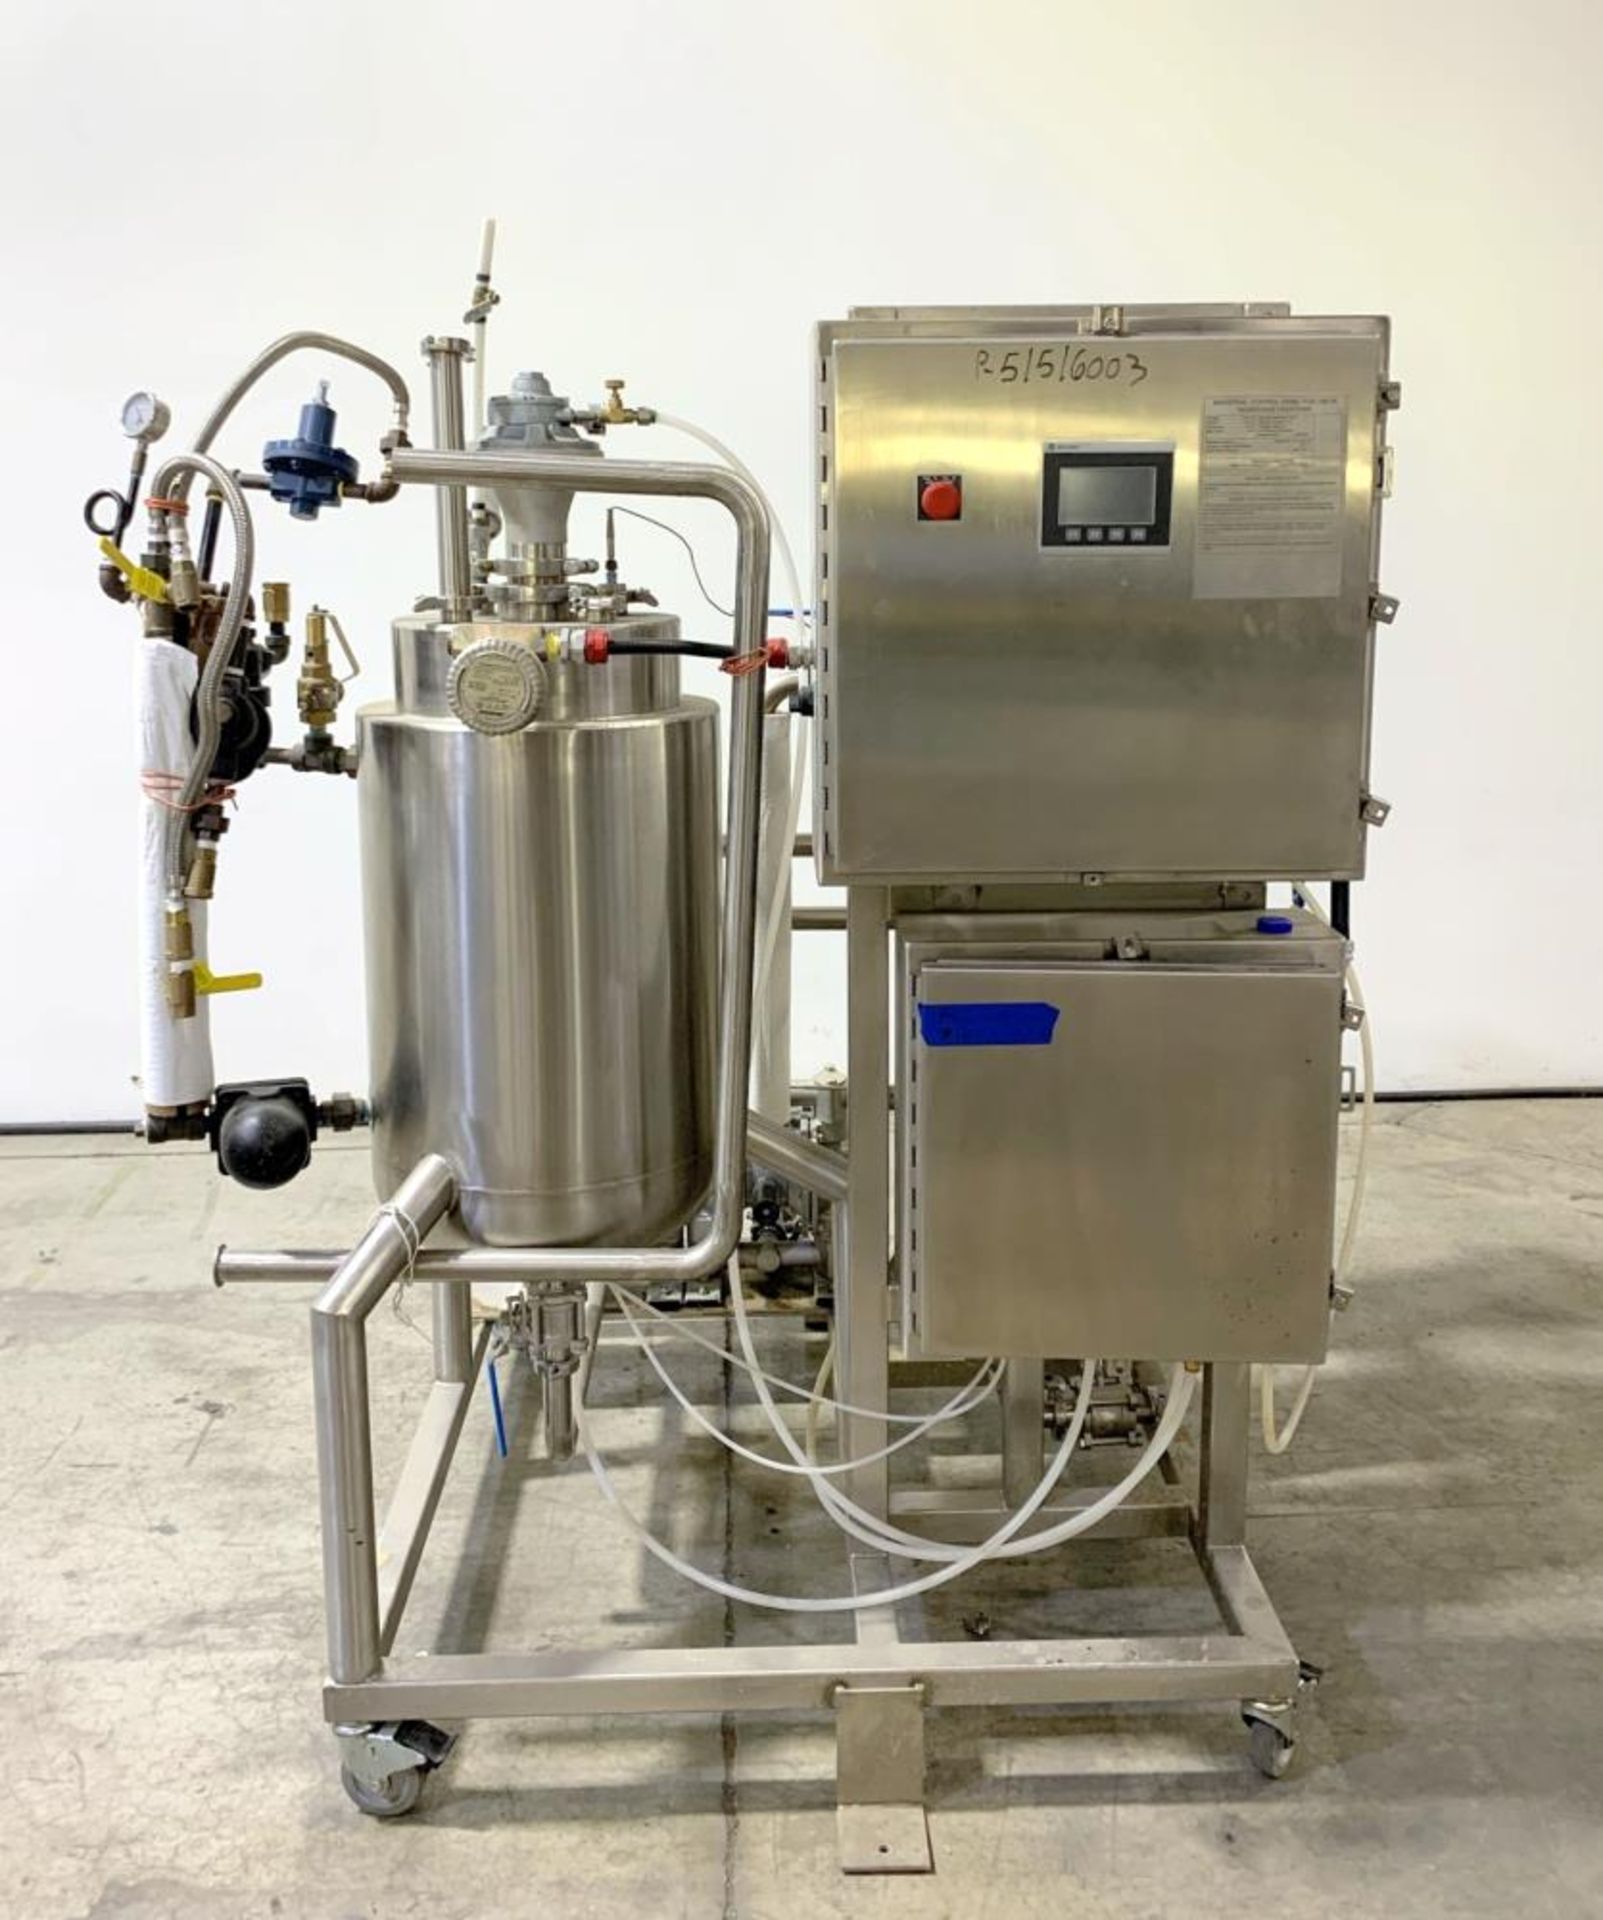 Pinnacle Stainless Complete Full Set Up Extraction Bundle - Image 171 of 273